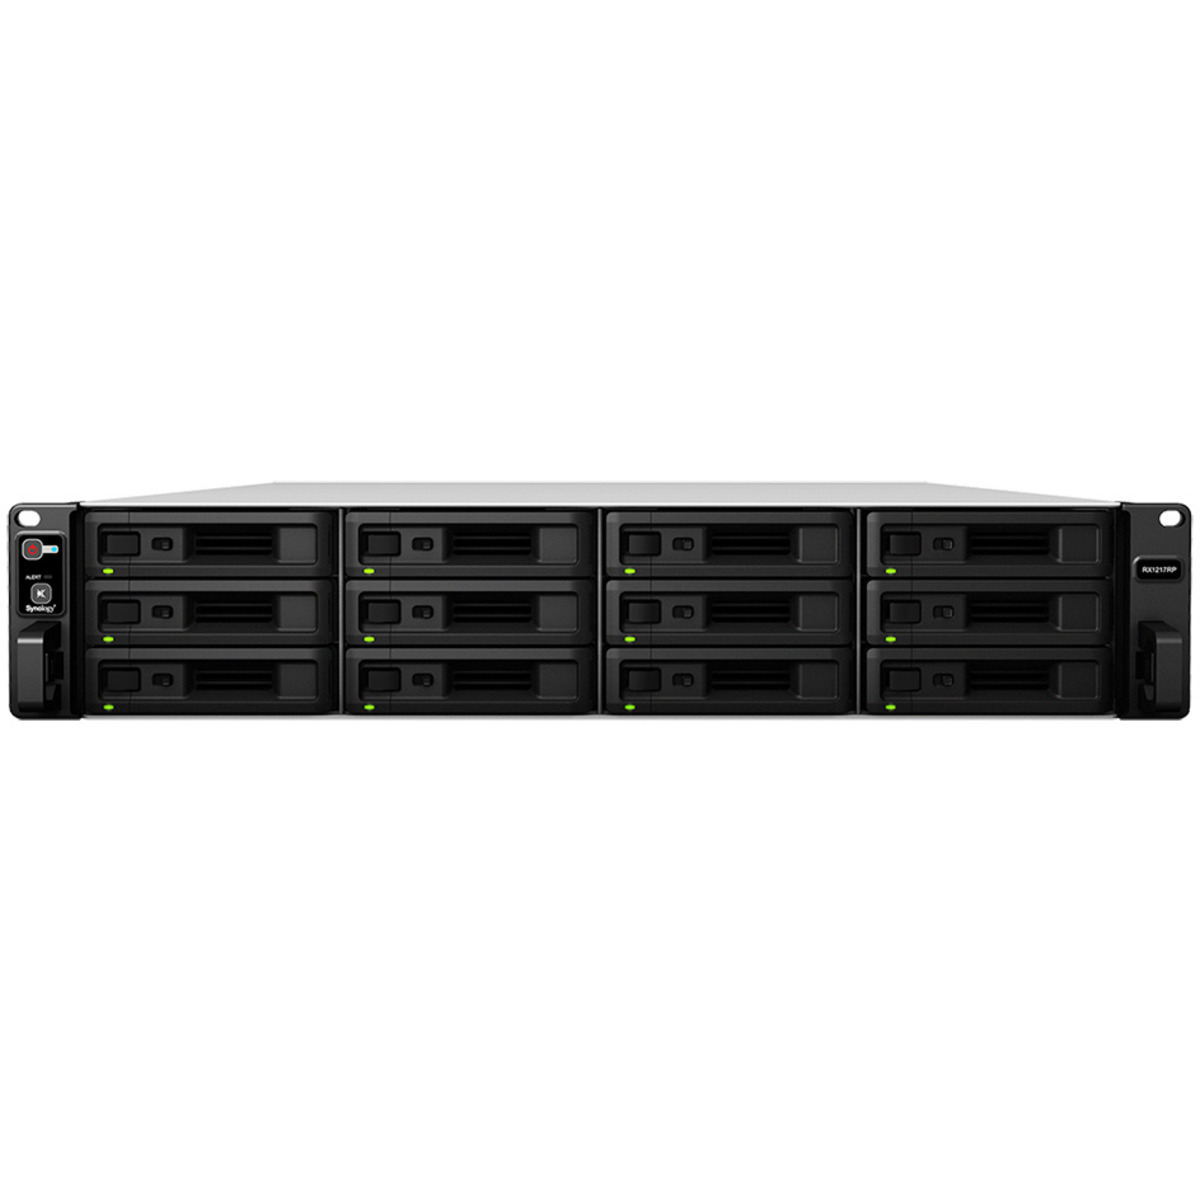 Synology RX1217 External Expansion Drive 14tb 12-Bay RackMount Large Business / Enterprise Expansion Enclosure 7x2tb Crucial MX500 CT2000MX500SSD1 2.5 560/510MB/s SATA 6Gb/s SSD CONSUMER Class Drives Installed - Burn-In Tested RX1217 External Expansion Drive